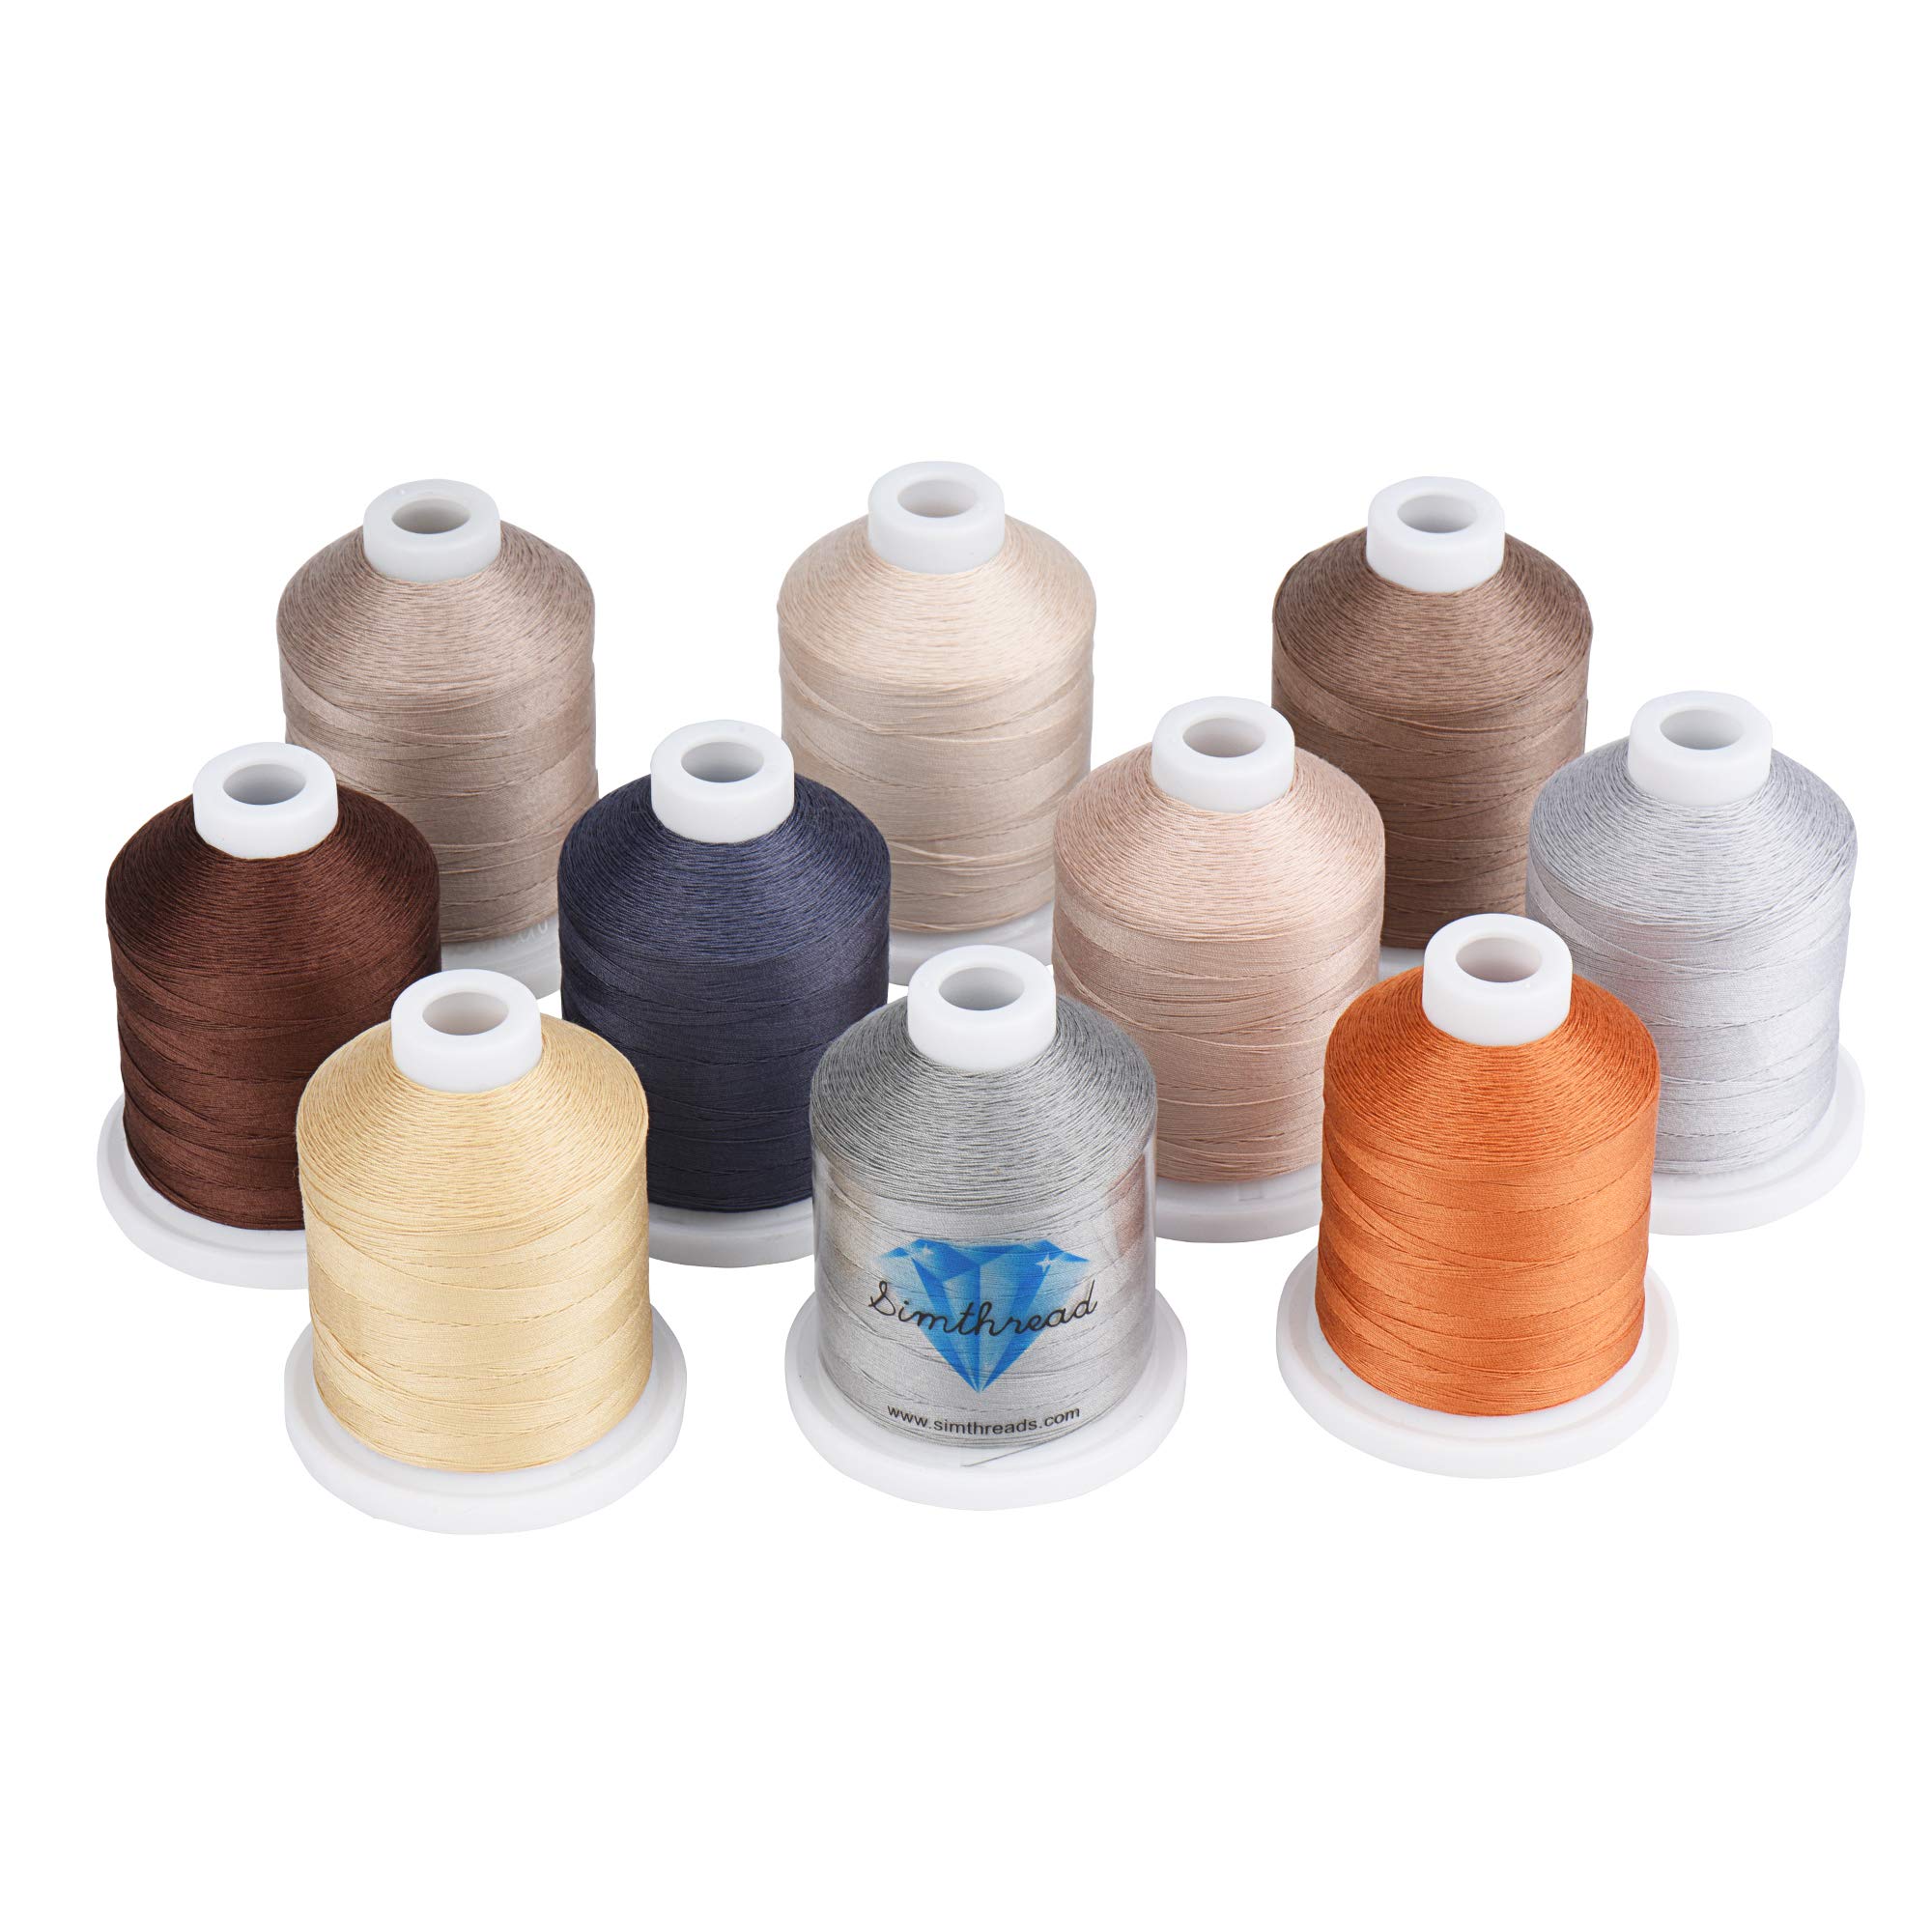 800 Yards Each 10 Neutral Colors Cotton Quilting Thread for Hand or Machine  Embroidery Sewing Quilting Piecing Applique etc